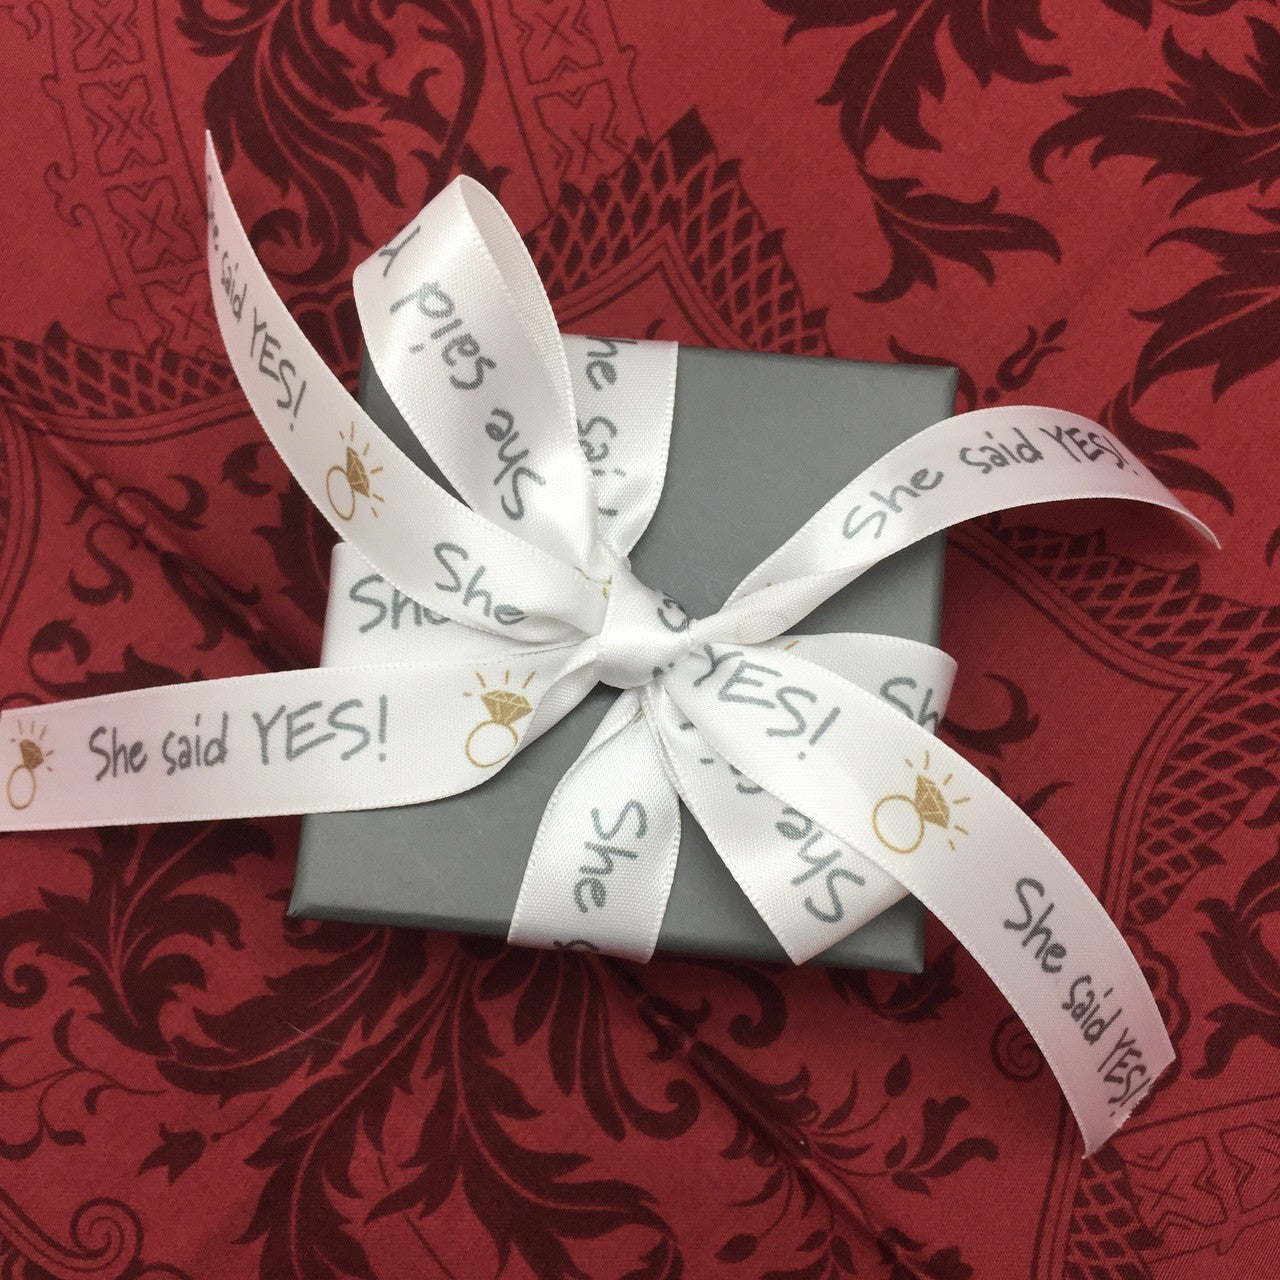 Tie a little box of congratulations for your newly engaged friend with our fun engagement ribbon!